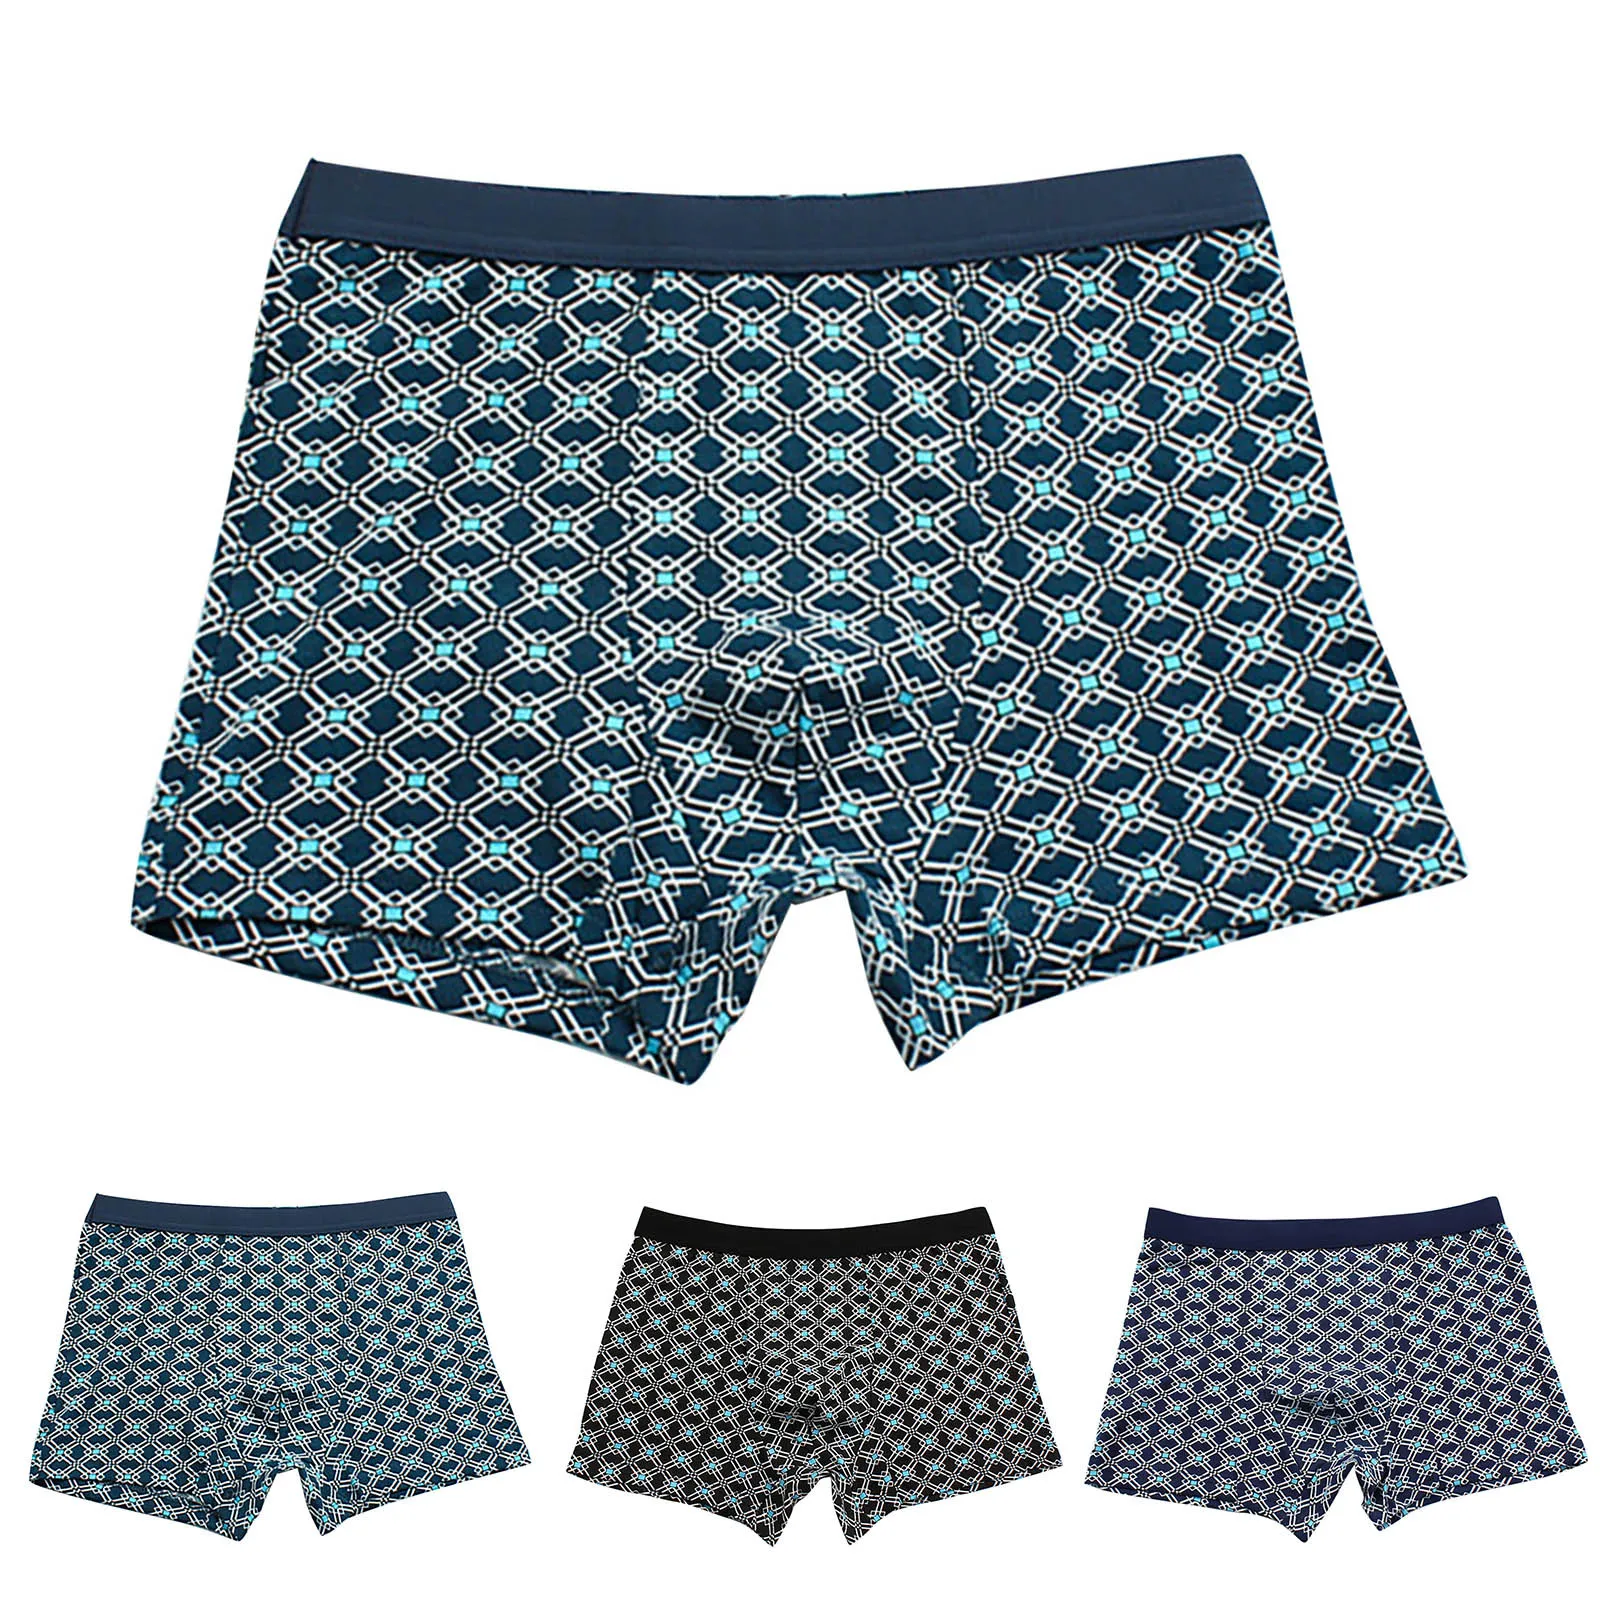 Men's Boxers Comfortable, Breathable And Fashionable Sports High Quality Boxers And Panties